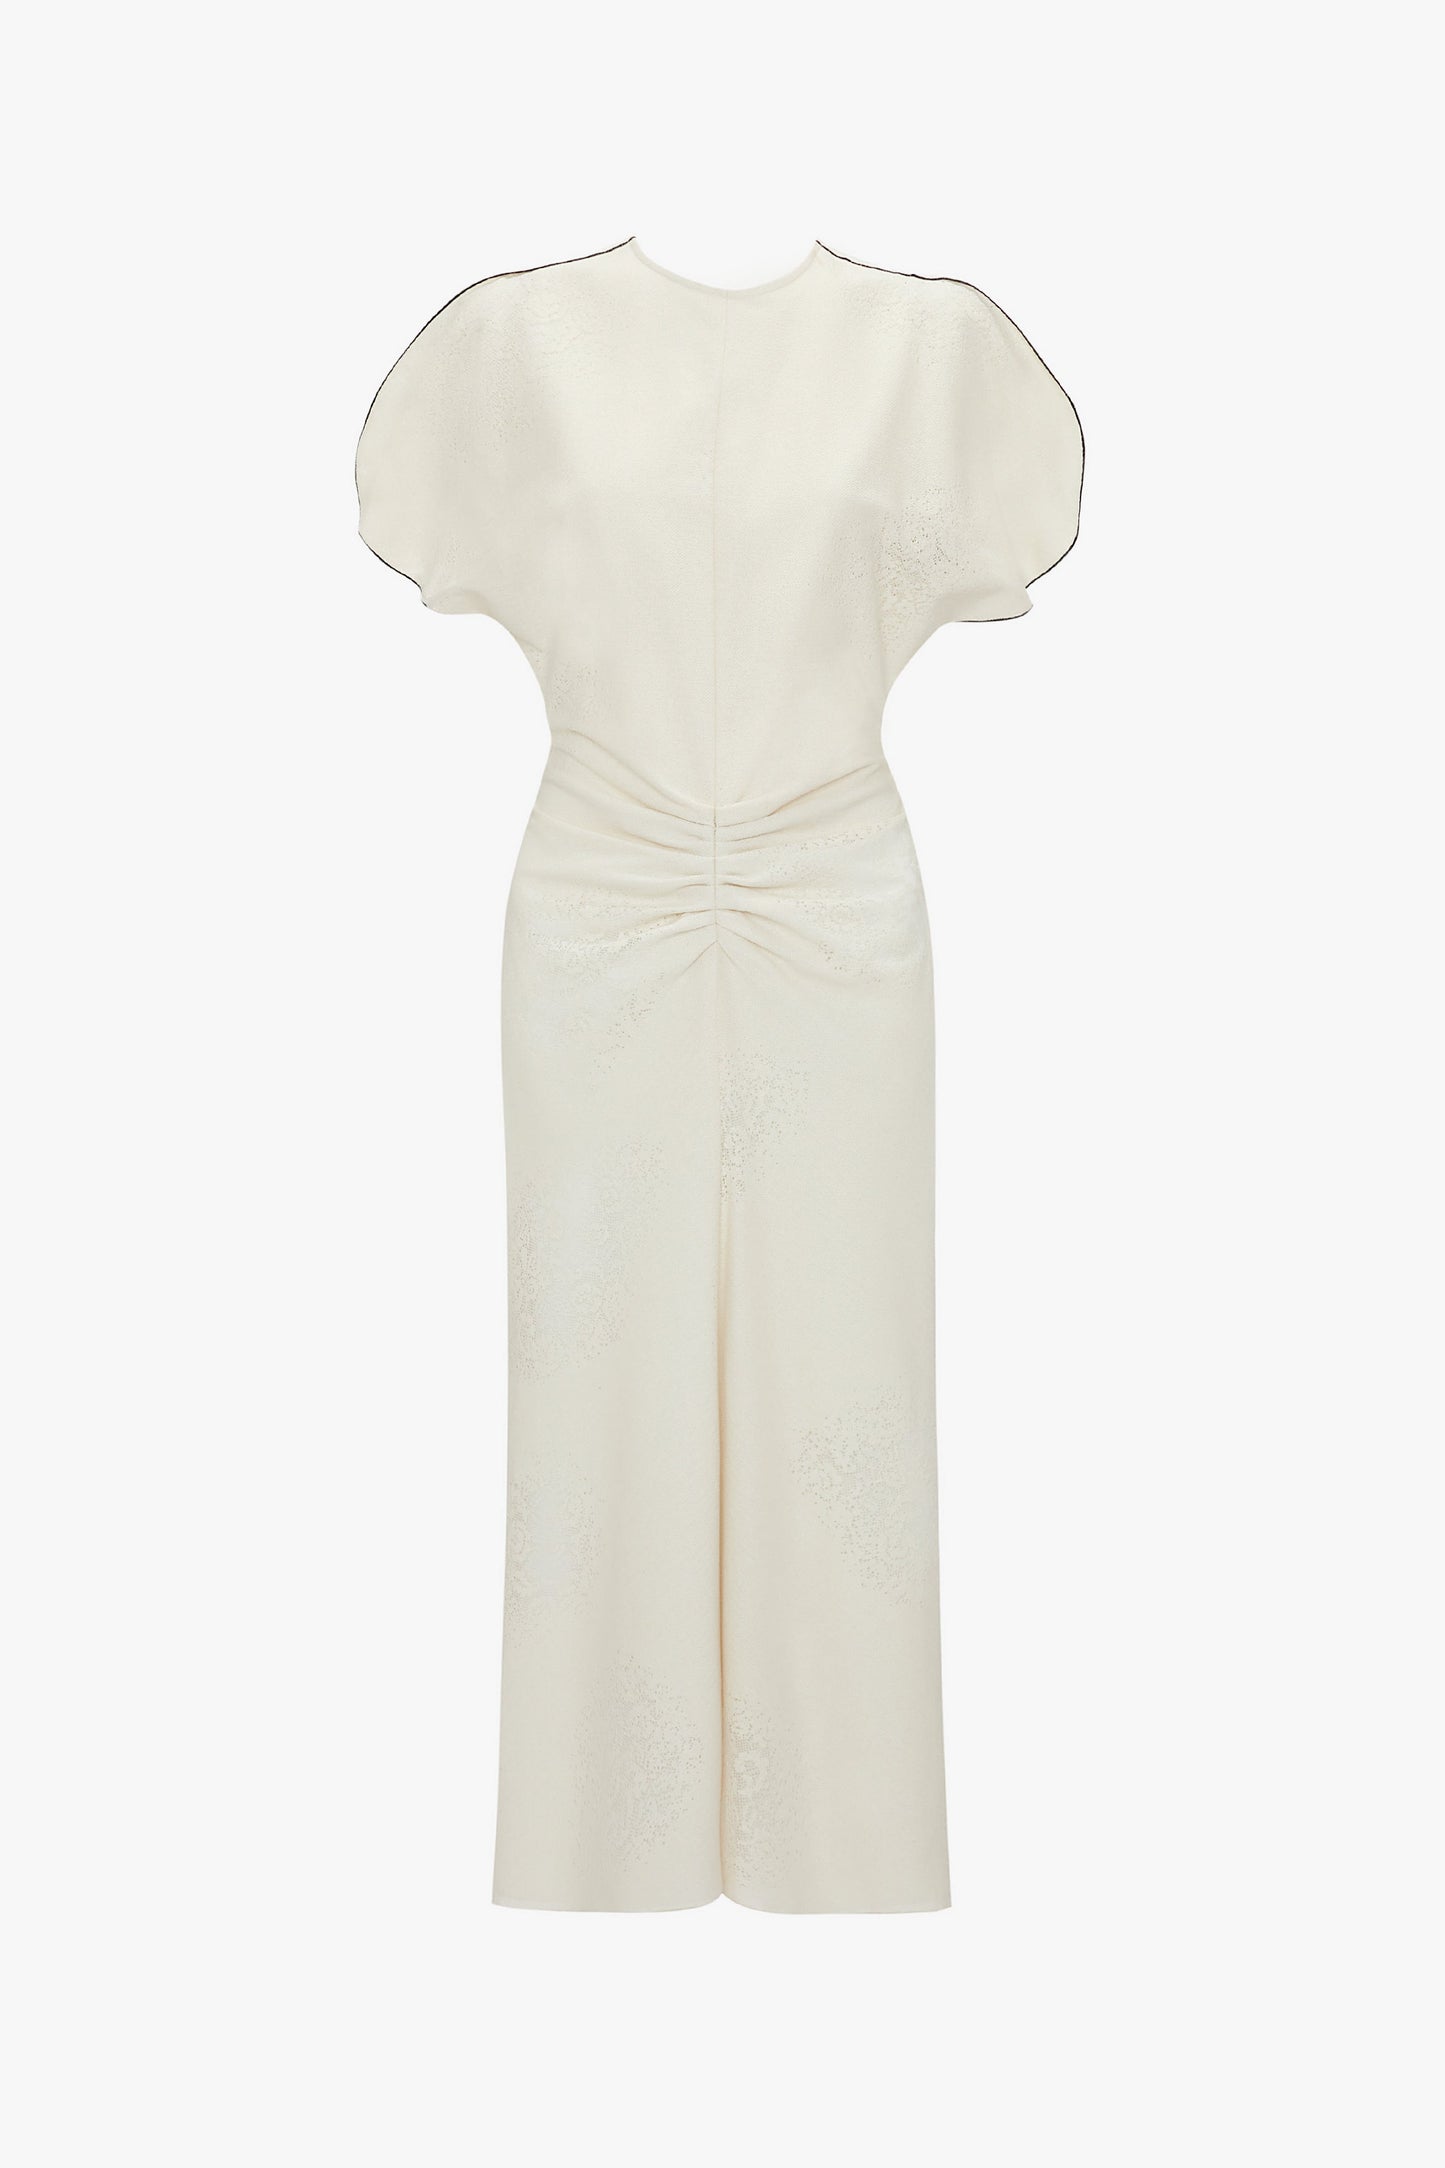 Victoria Beckham White dress with a gathered waist, short sleeves, and a knotted detail at the waist on a plain background.